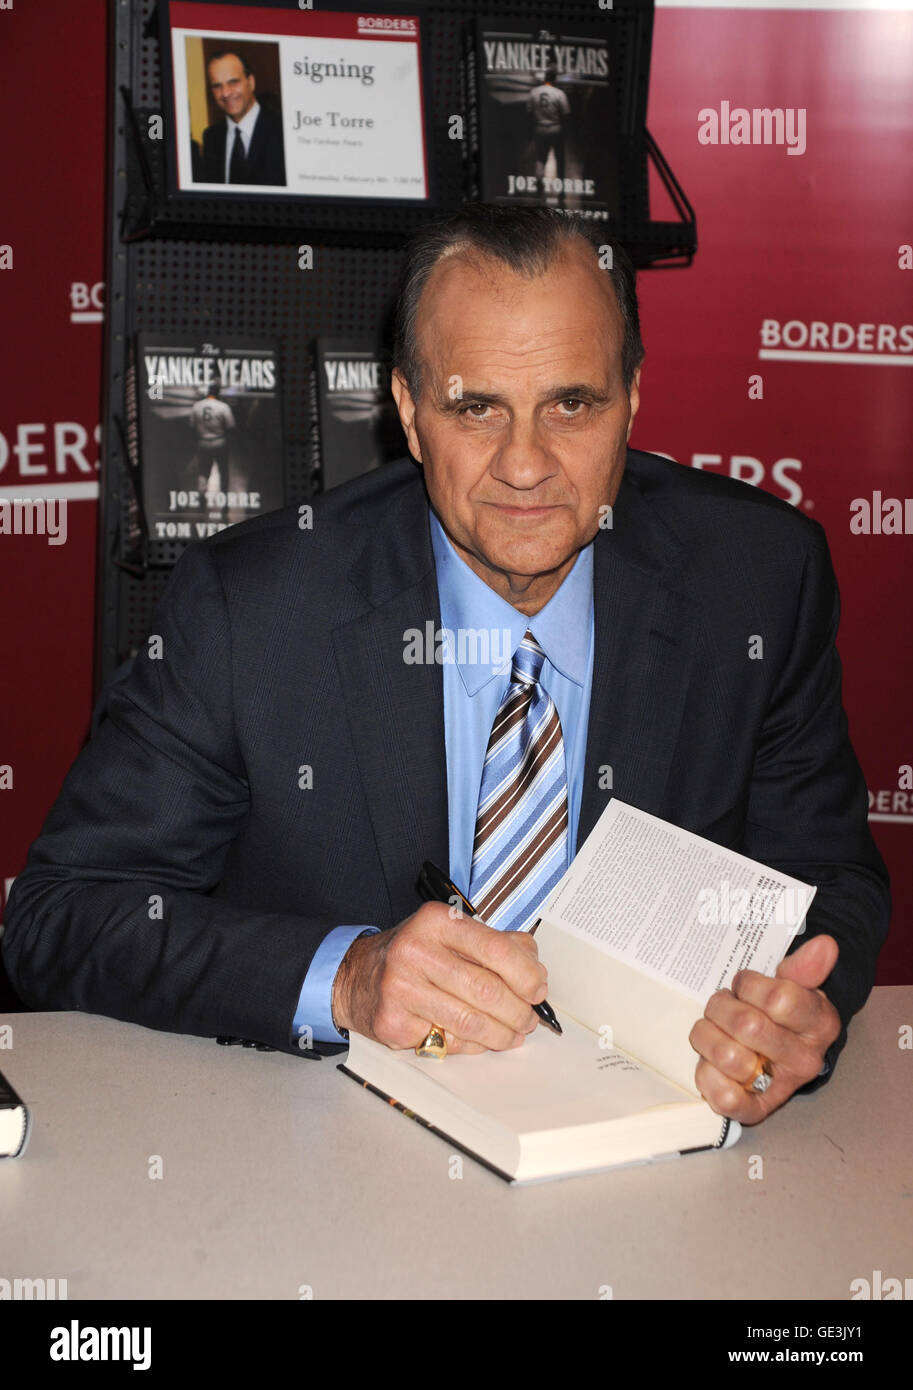 former-yankees-manager-joe-torre-at-the-signing-of-his-new-book-joe